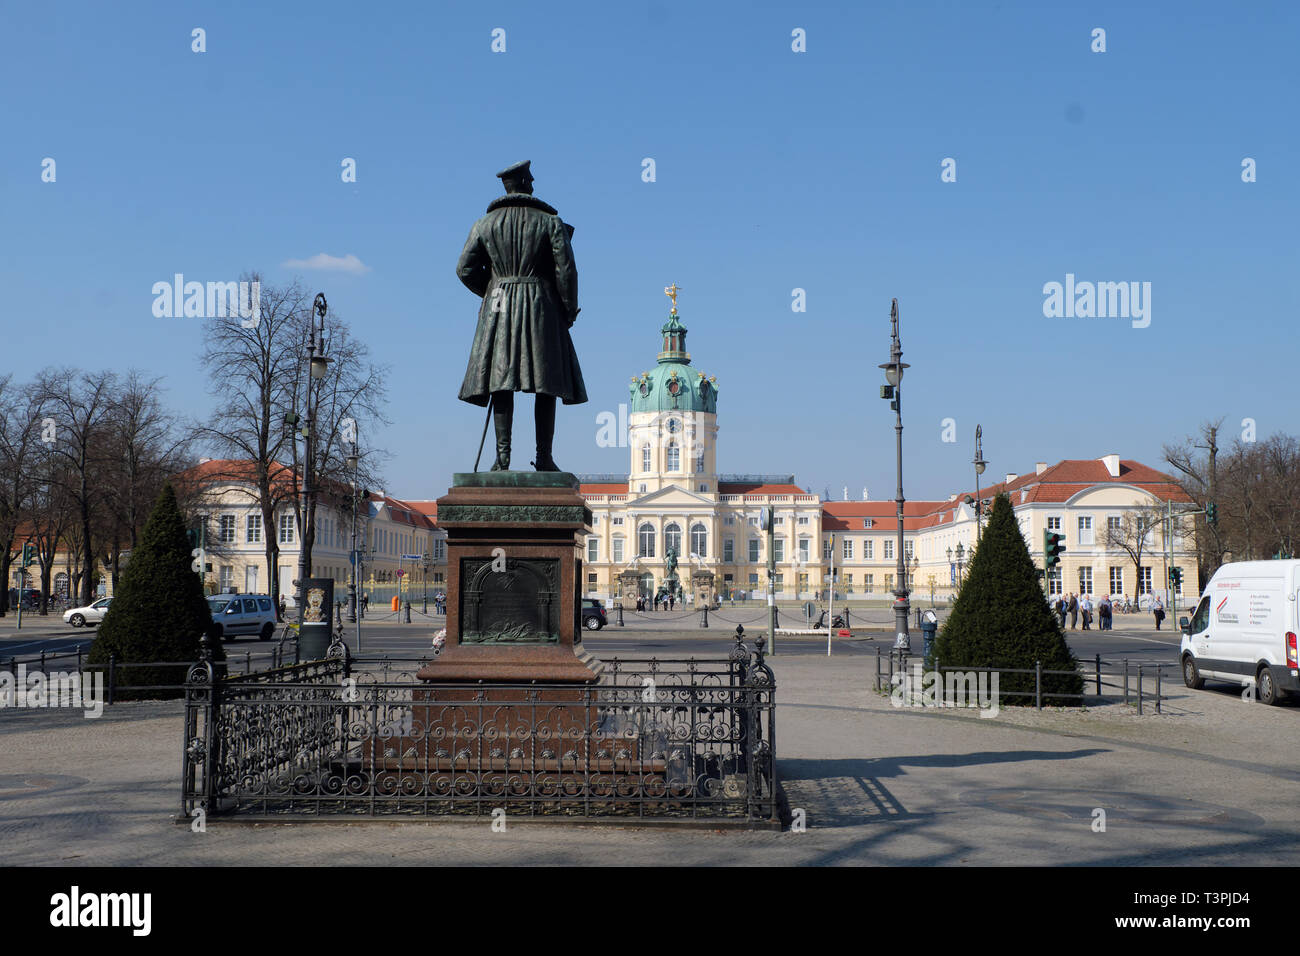 Monument to Prussian Prince Albrecht, erected opposite the entrance to Schloss Charlottenburg in 1901 Stock Photo